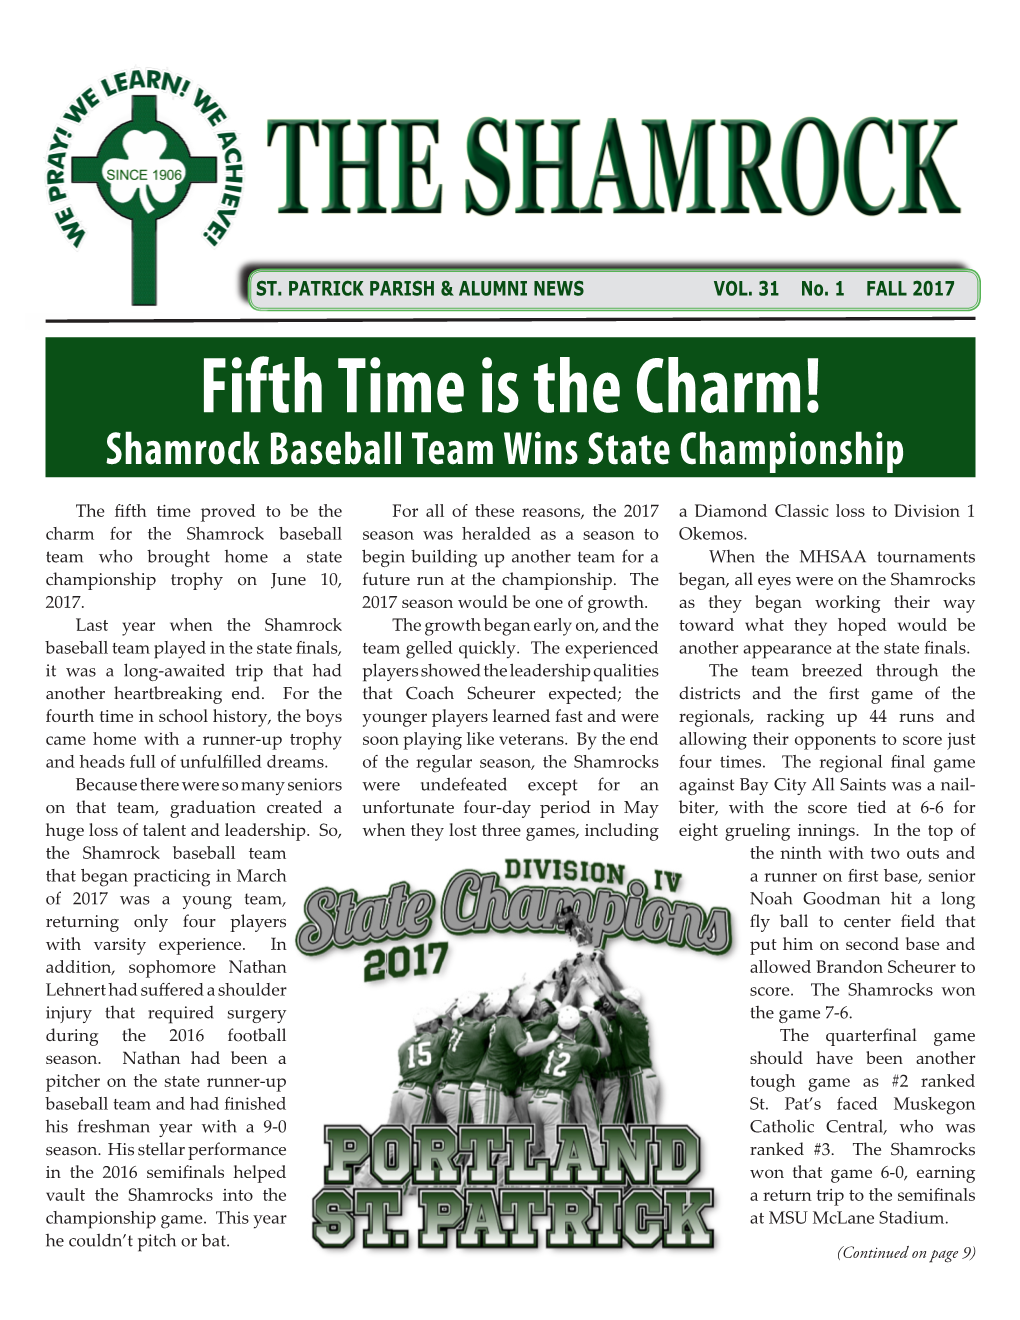 Fifth Time Is the Charm! Shamrock Baseball Team Wins State Championship!